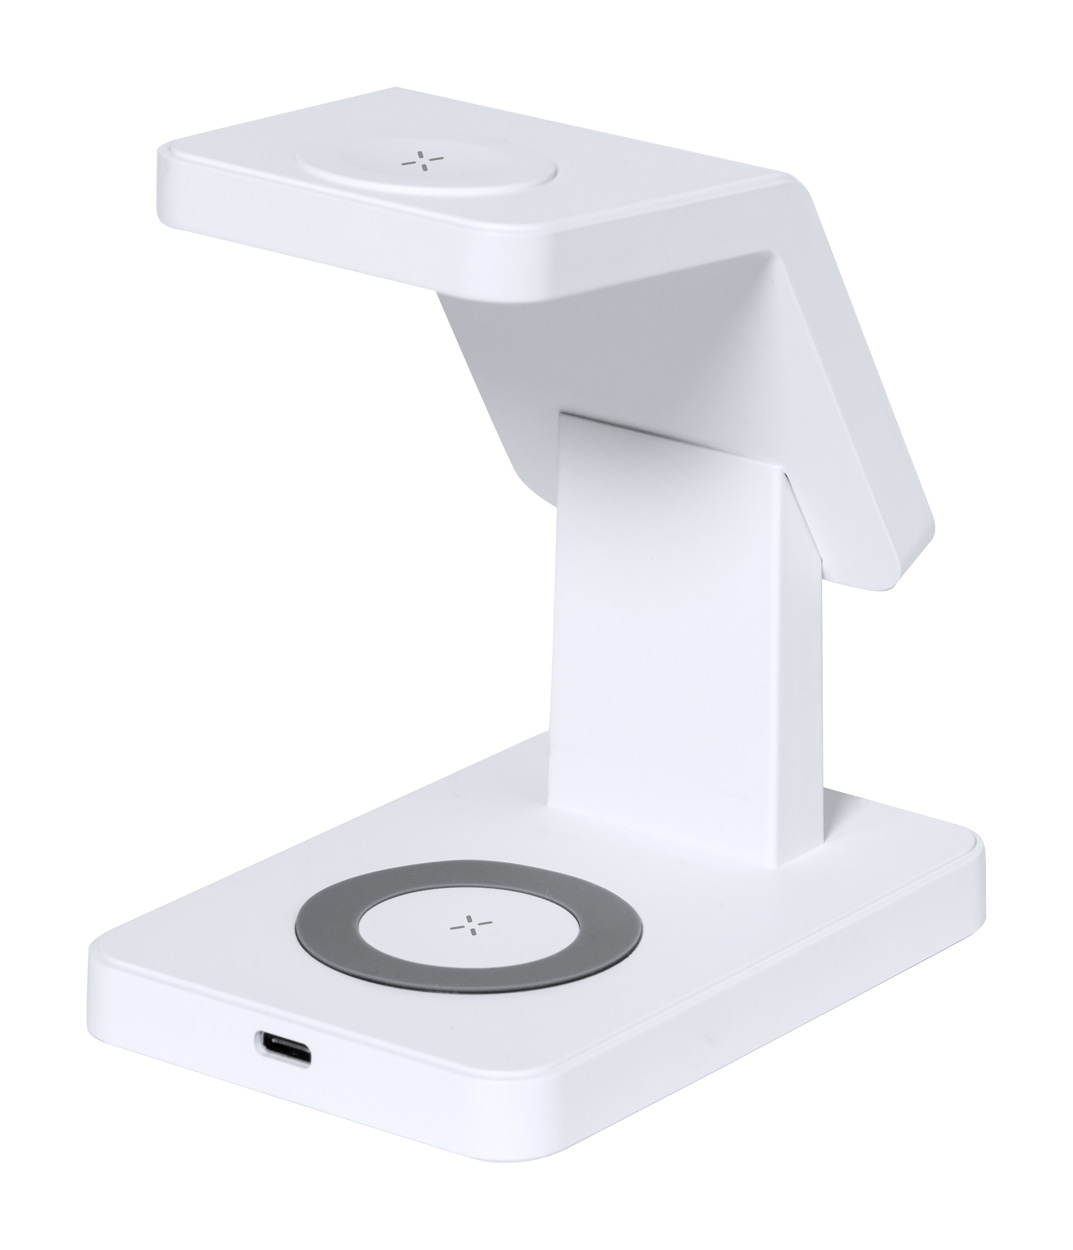 Krastop wireless charger with mobile phone stand - white